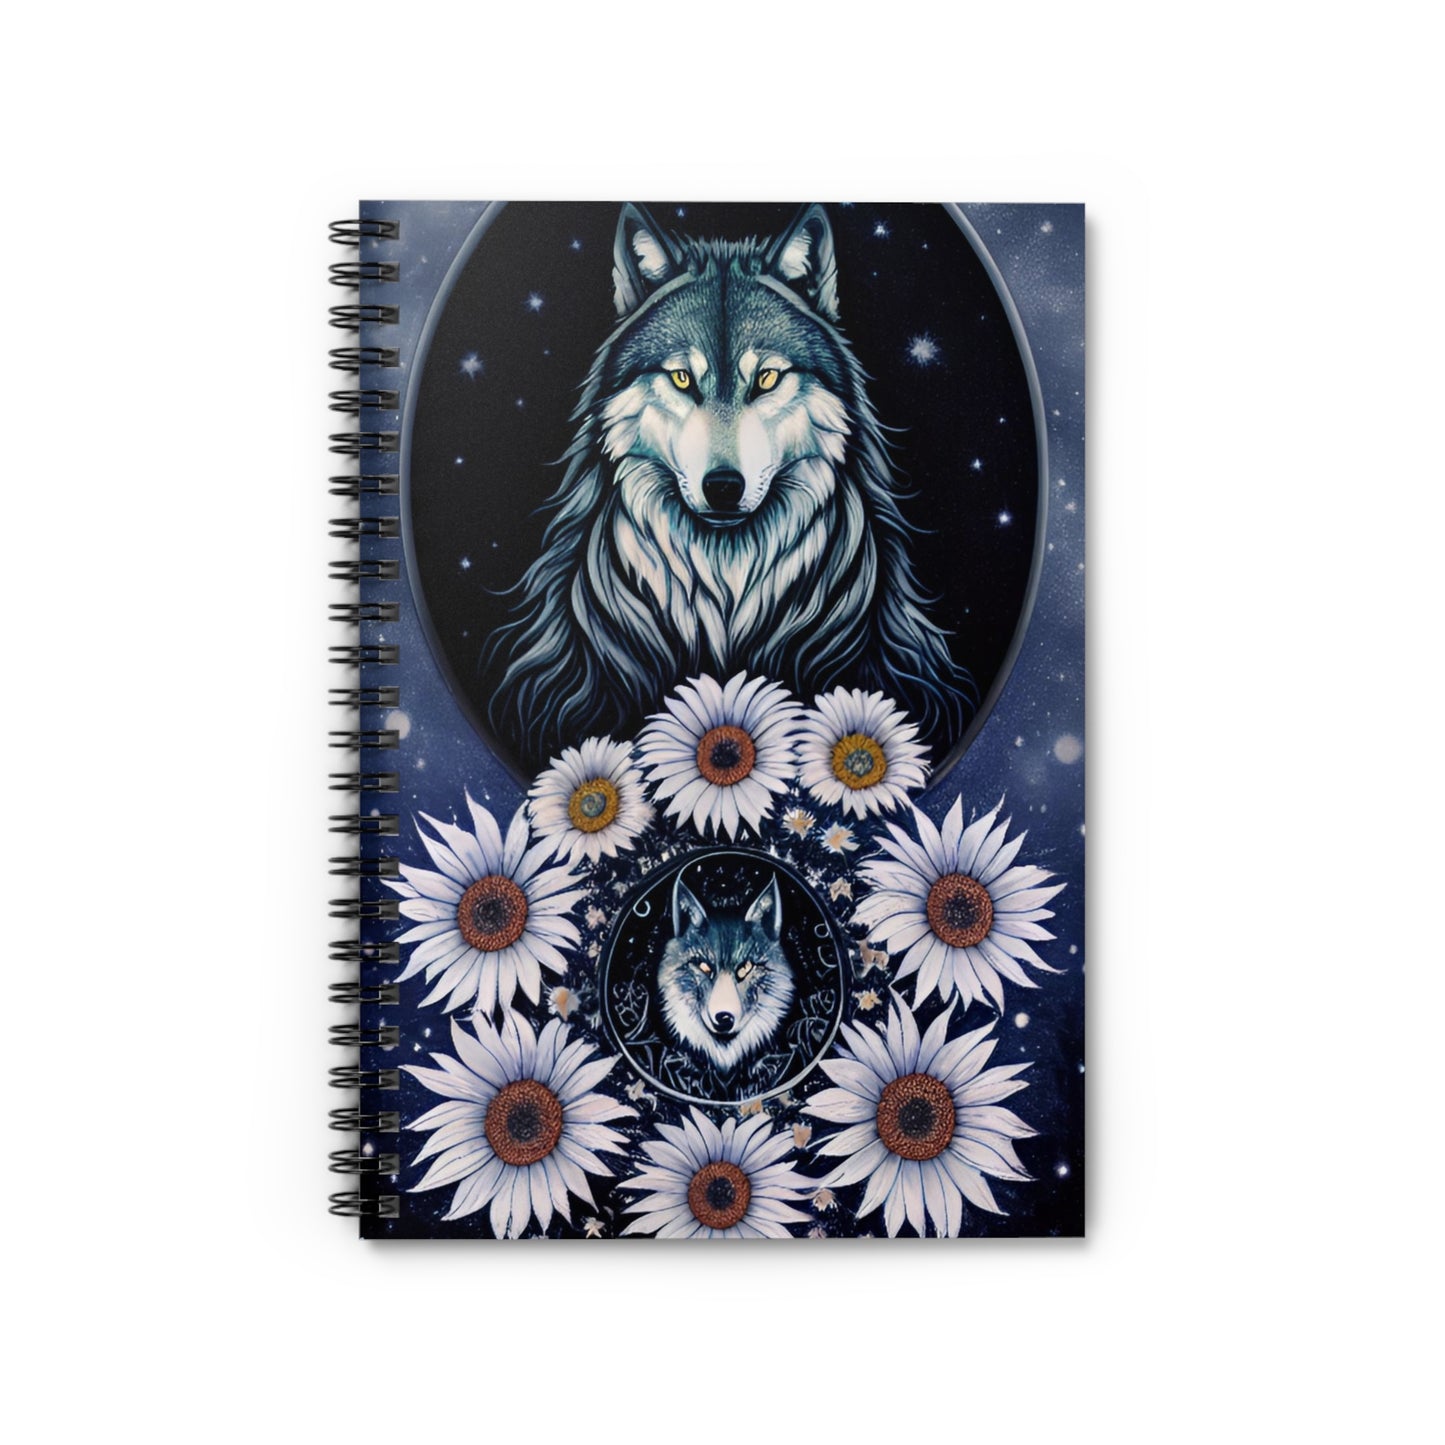 Wolves & Daisies Spiral Notebook - Ruled Line